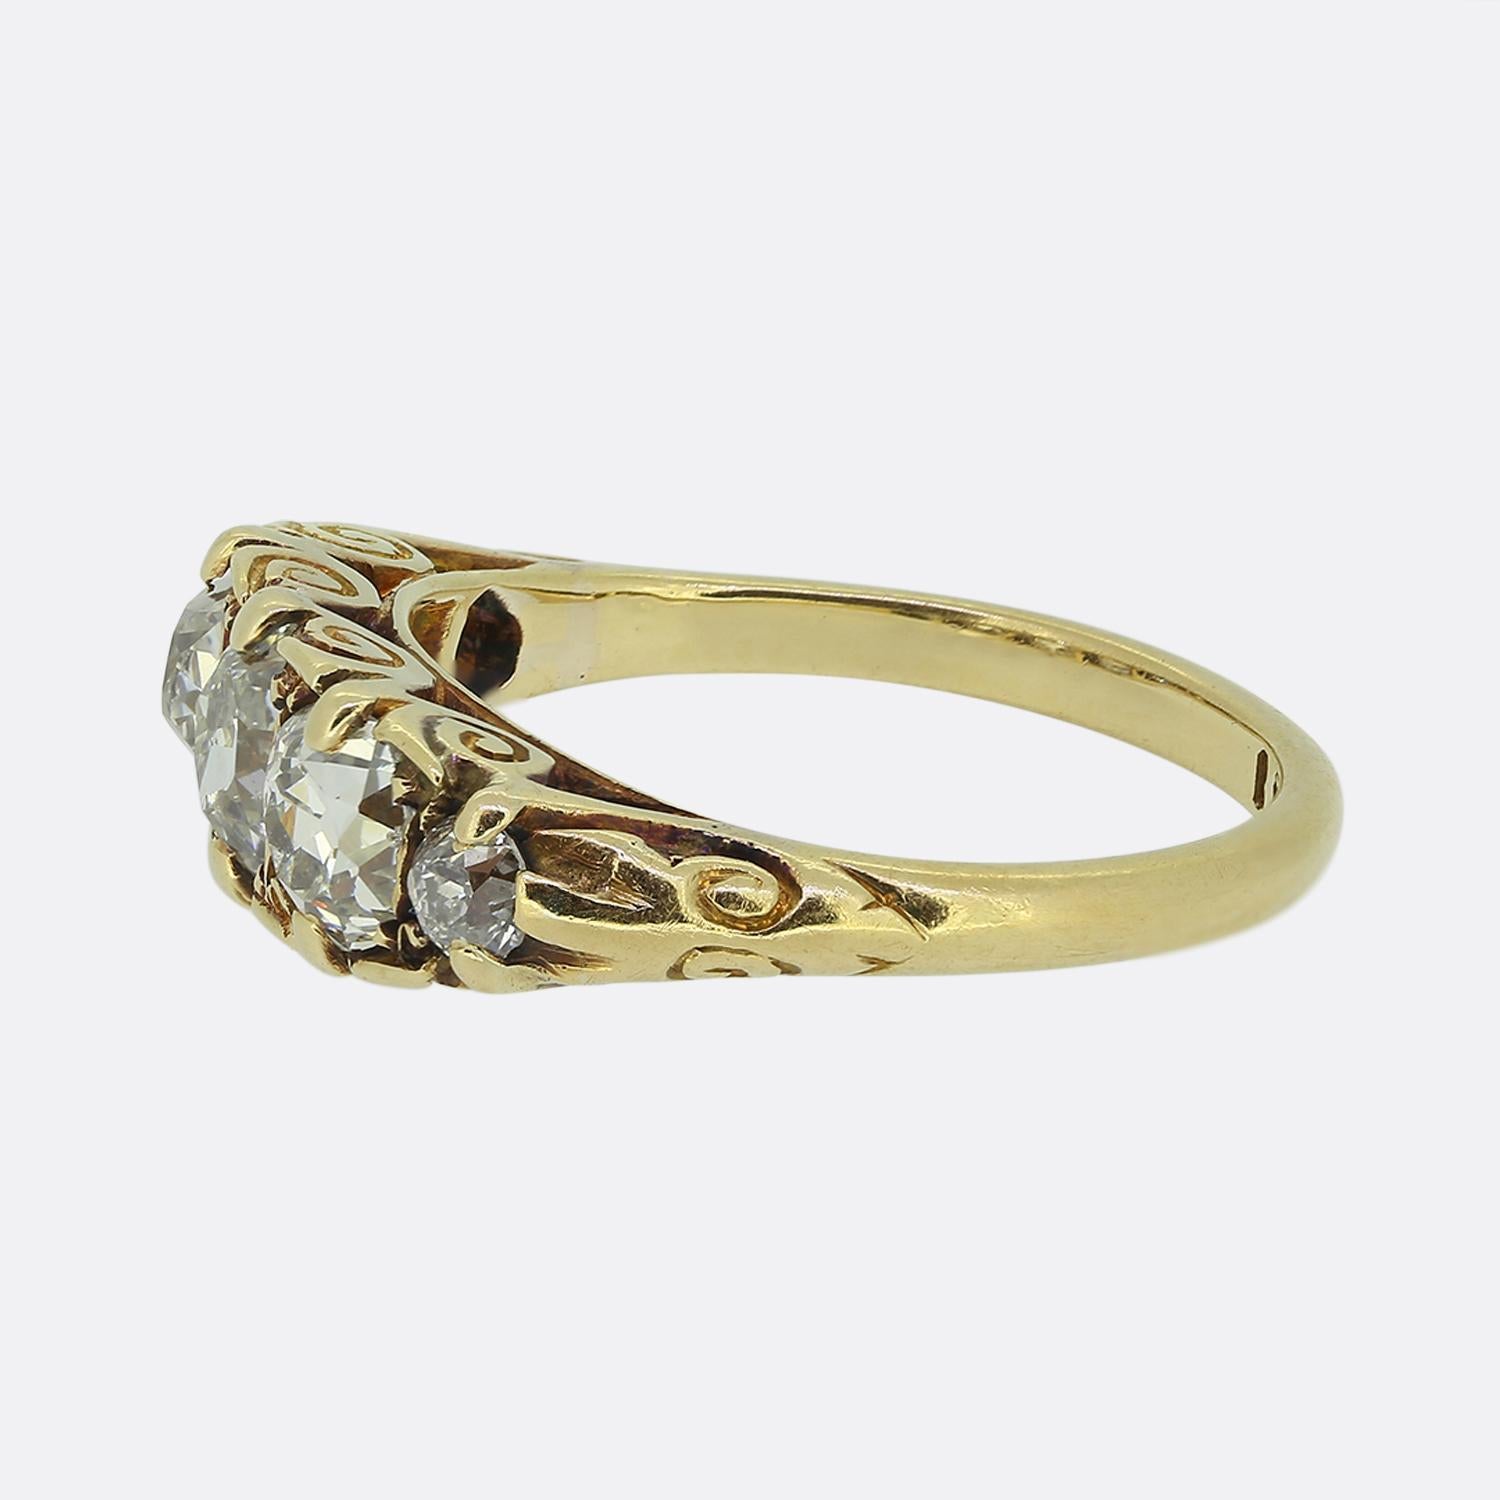 Here we have a wonderful five-stone diamond ring dating back to the Victorian period. This antique piece has been crafted from a warm 18ct yellow gold and features three large round faceted old cut diamonds at the centre of the face with a slightly